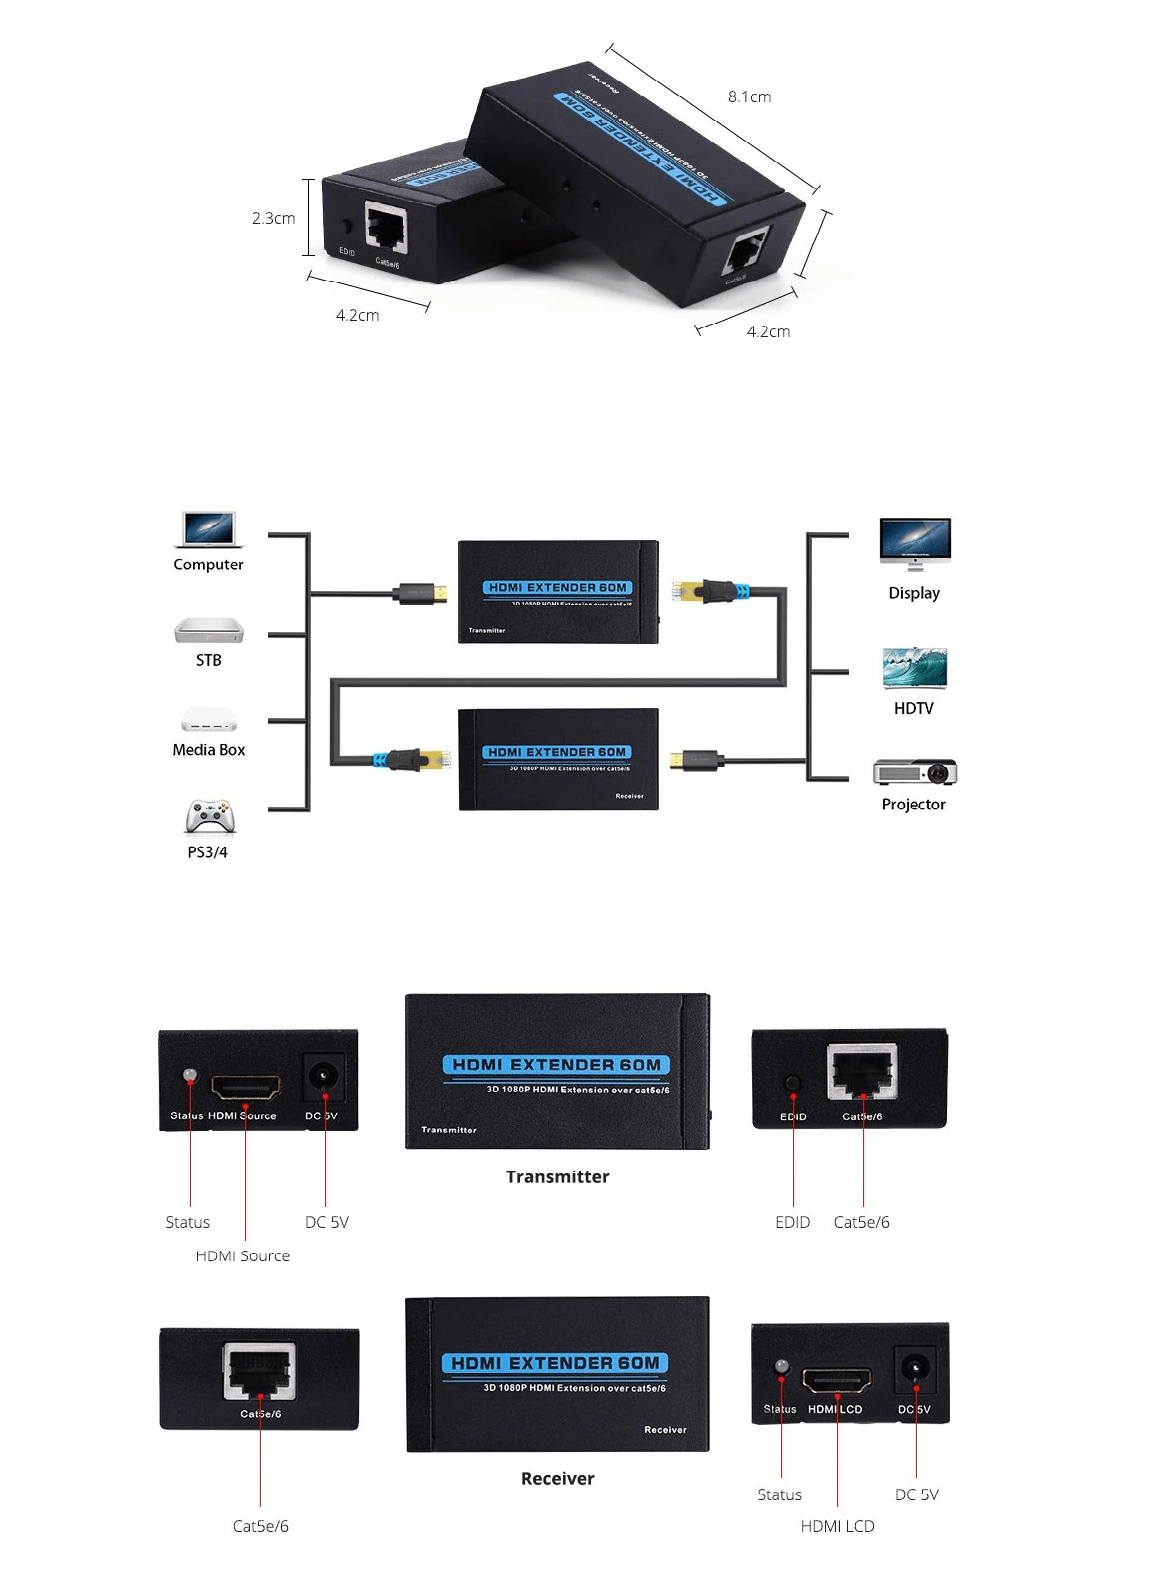 How to use the rj45 network to broadcast on multiple screens?